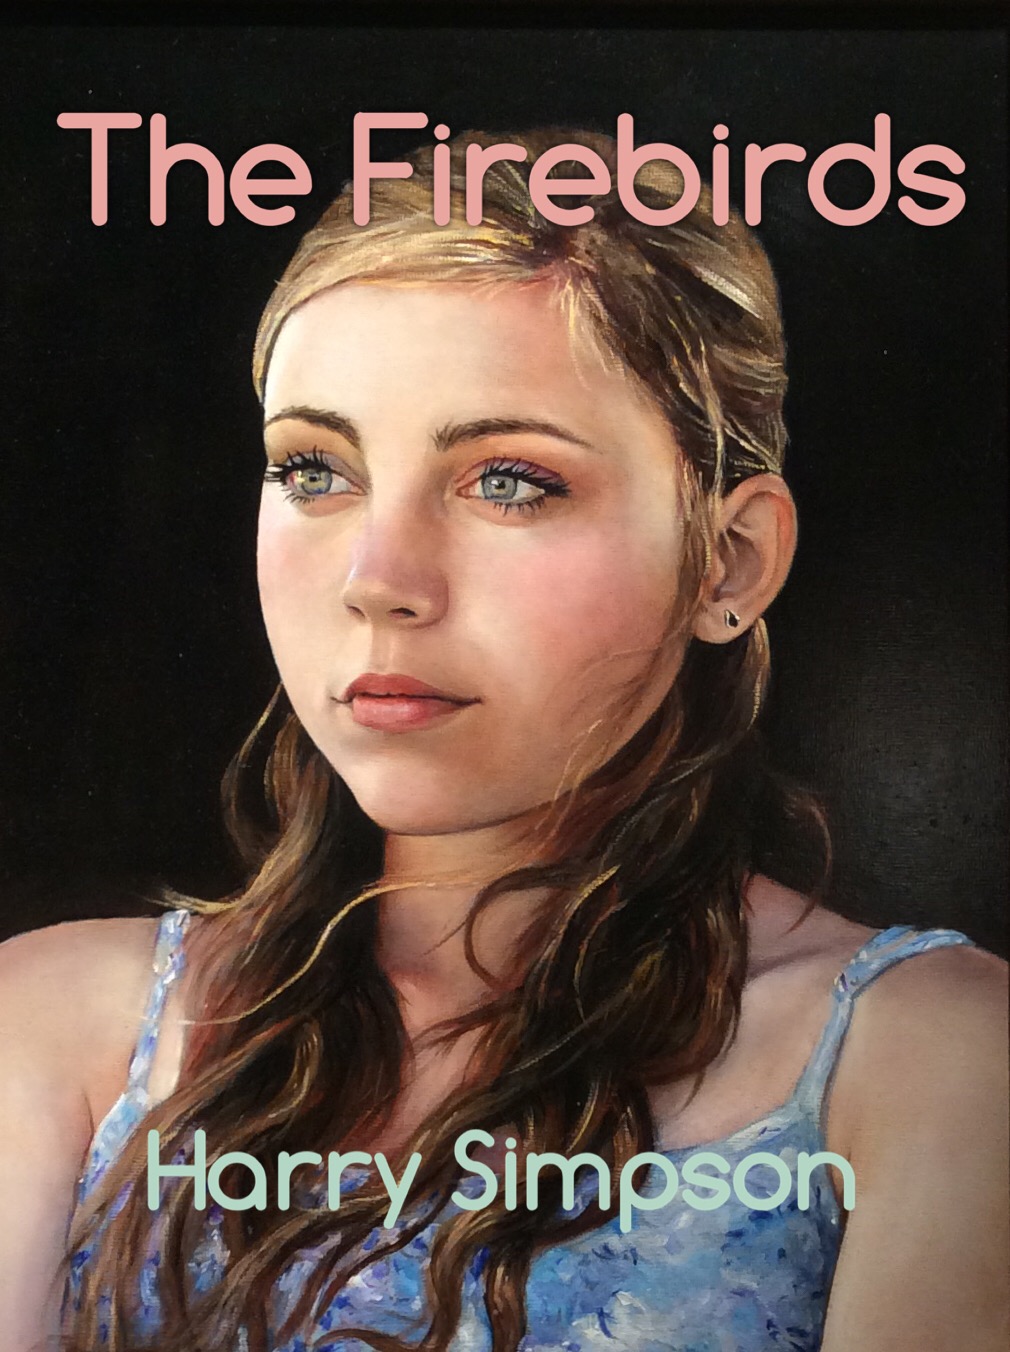 FREE: The Firebirds by Harry Simpson